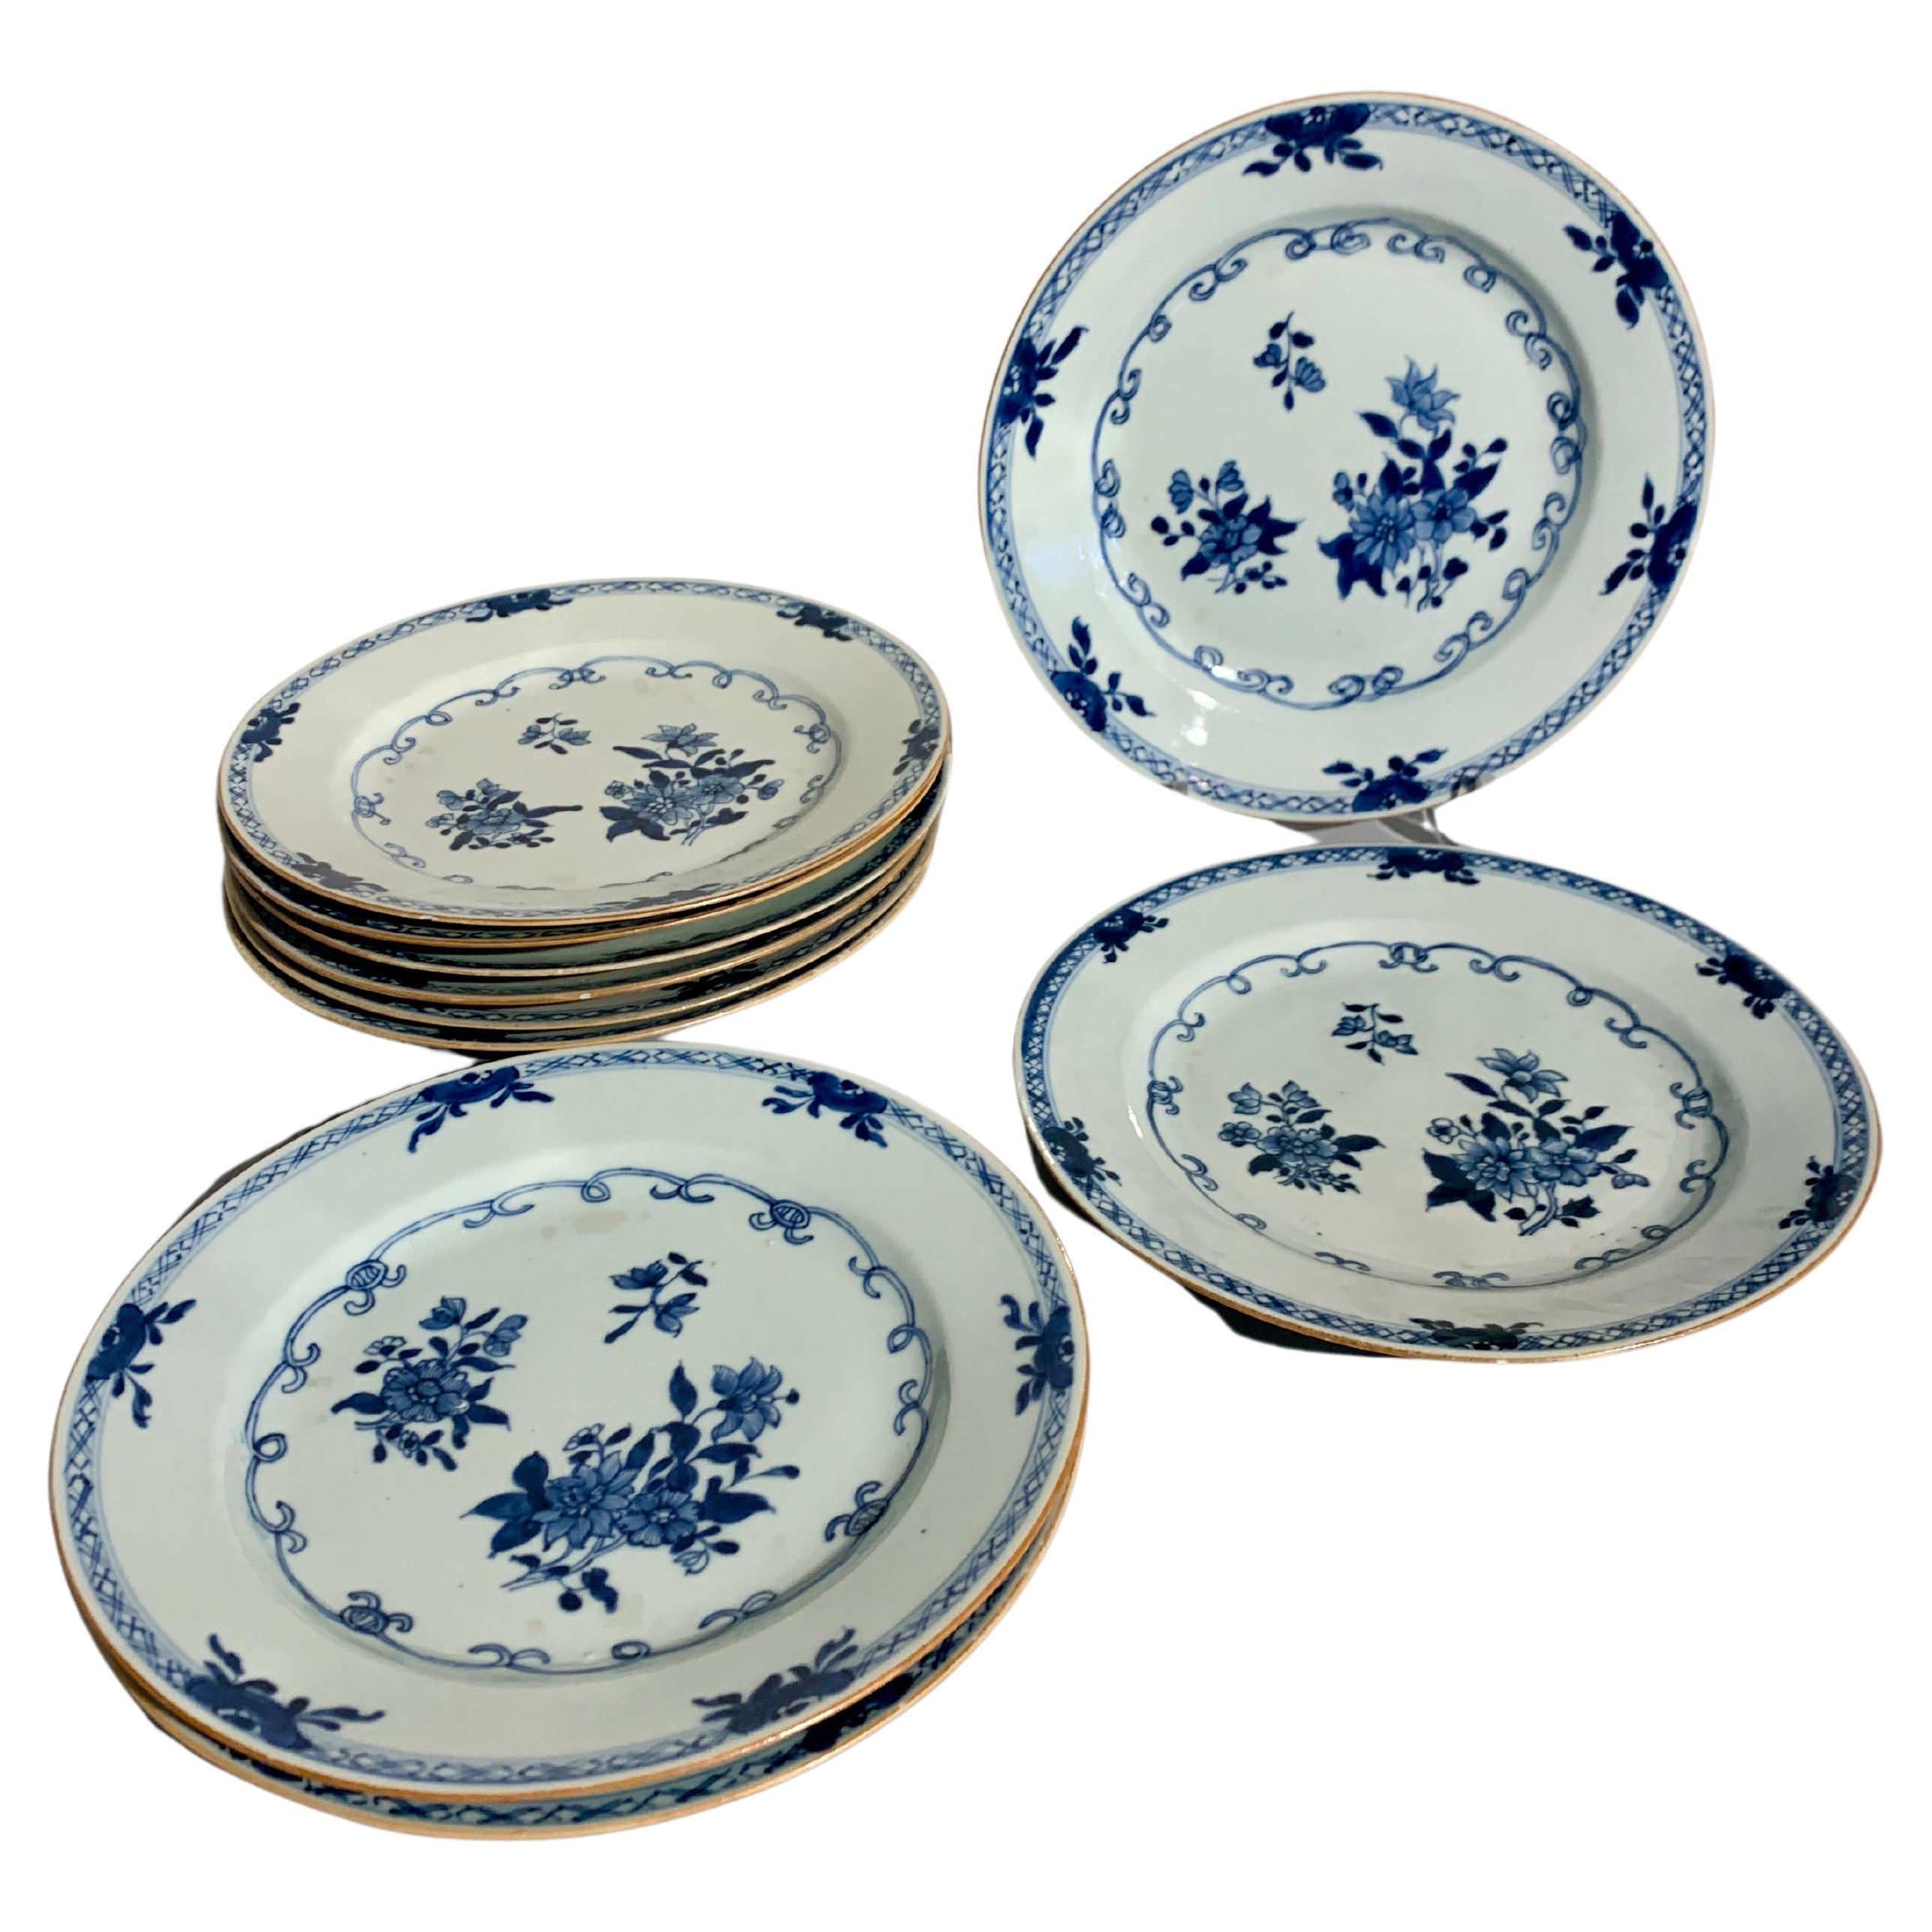 Chinese Export Blue and White Porcelain Plates, Set of 10, 18th Century, China